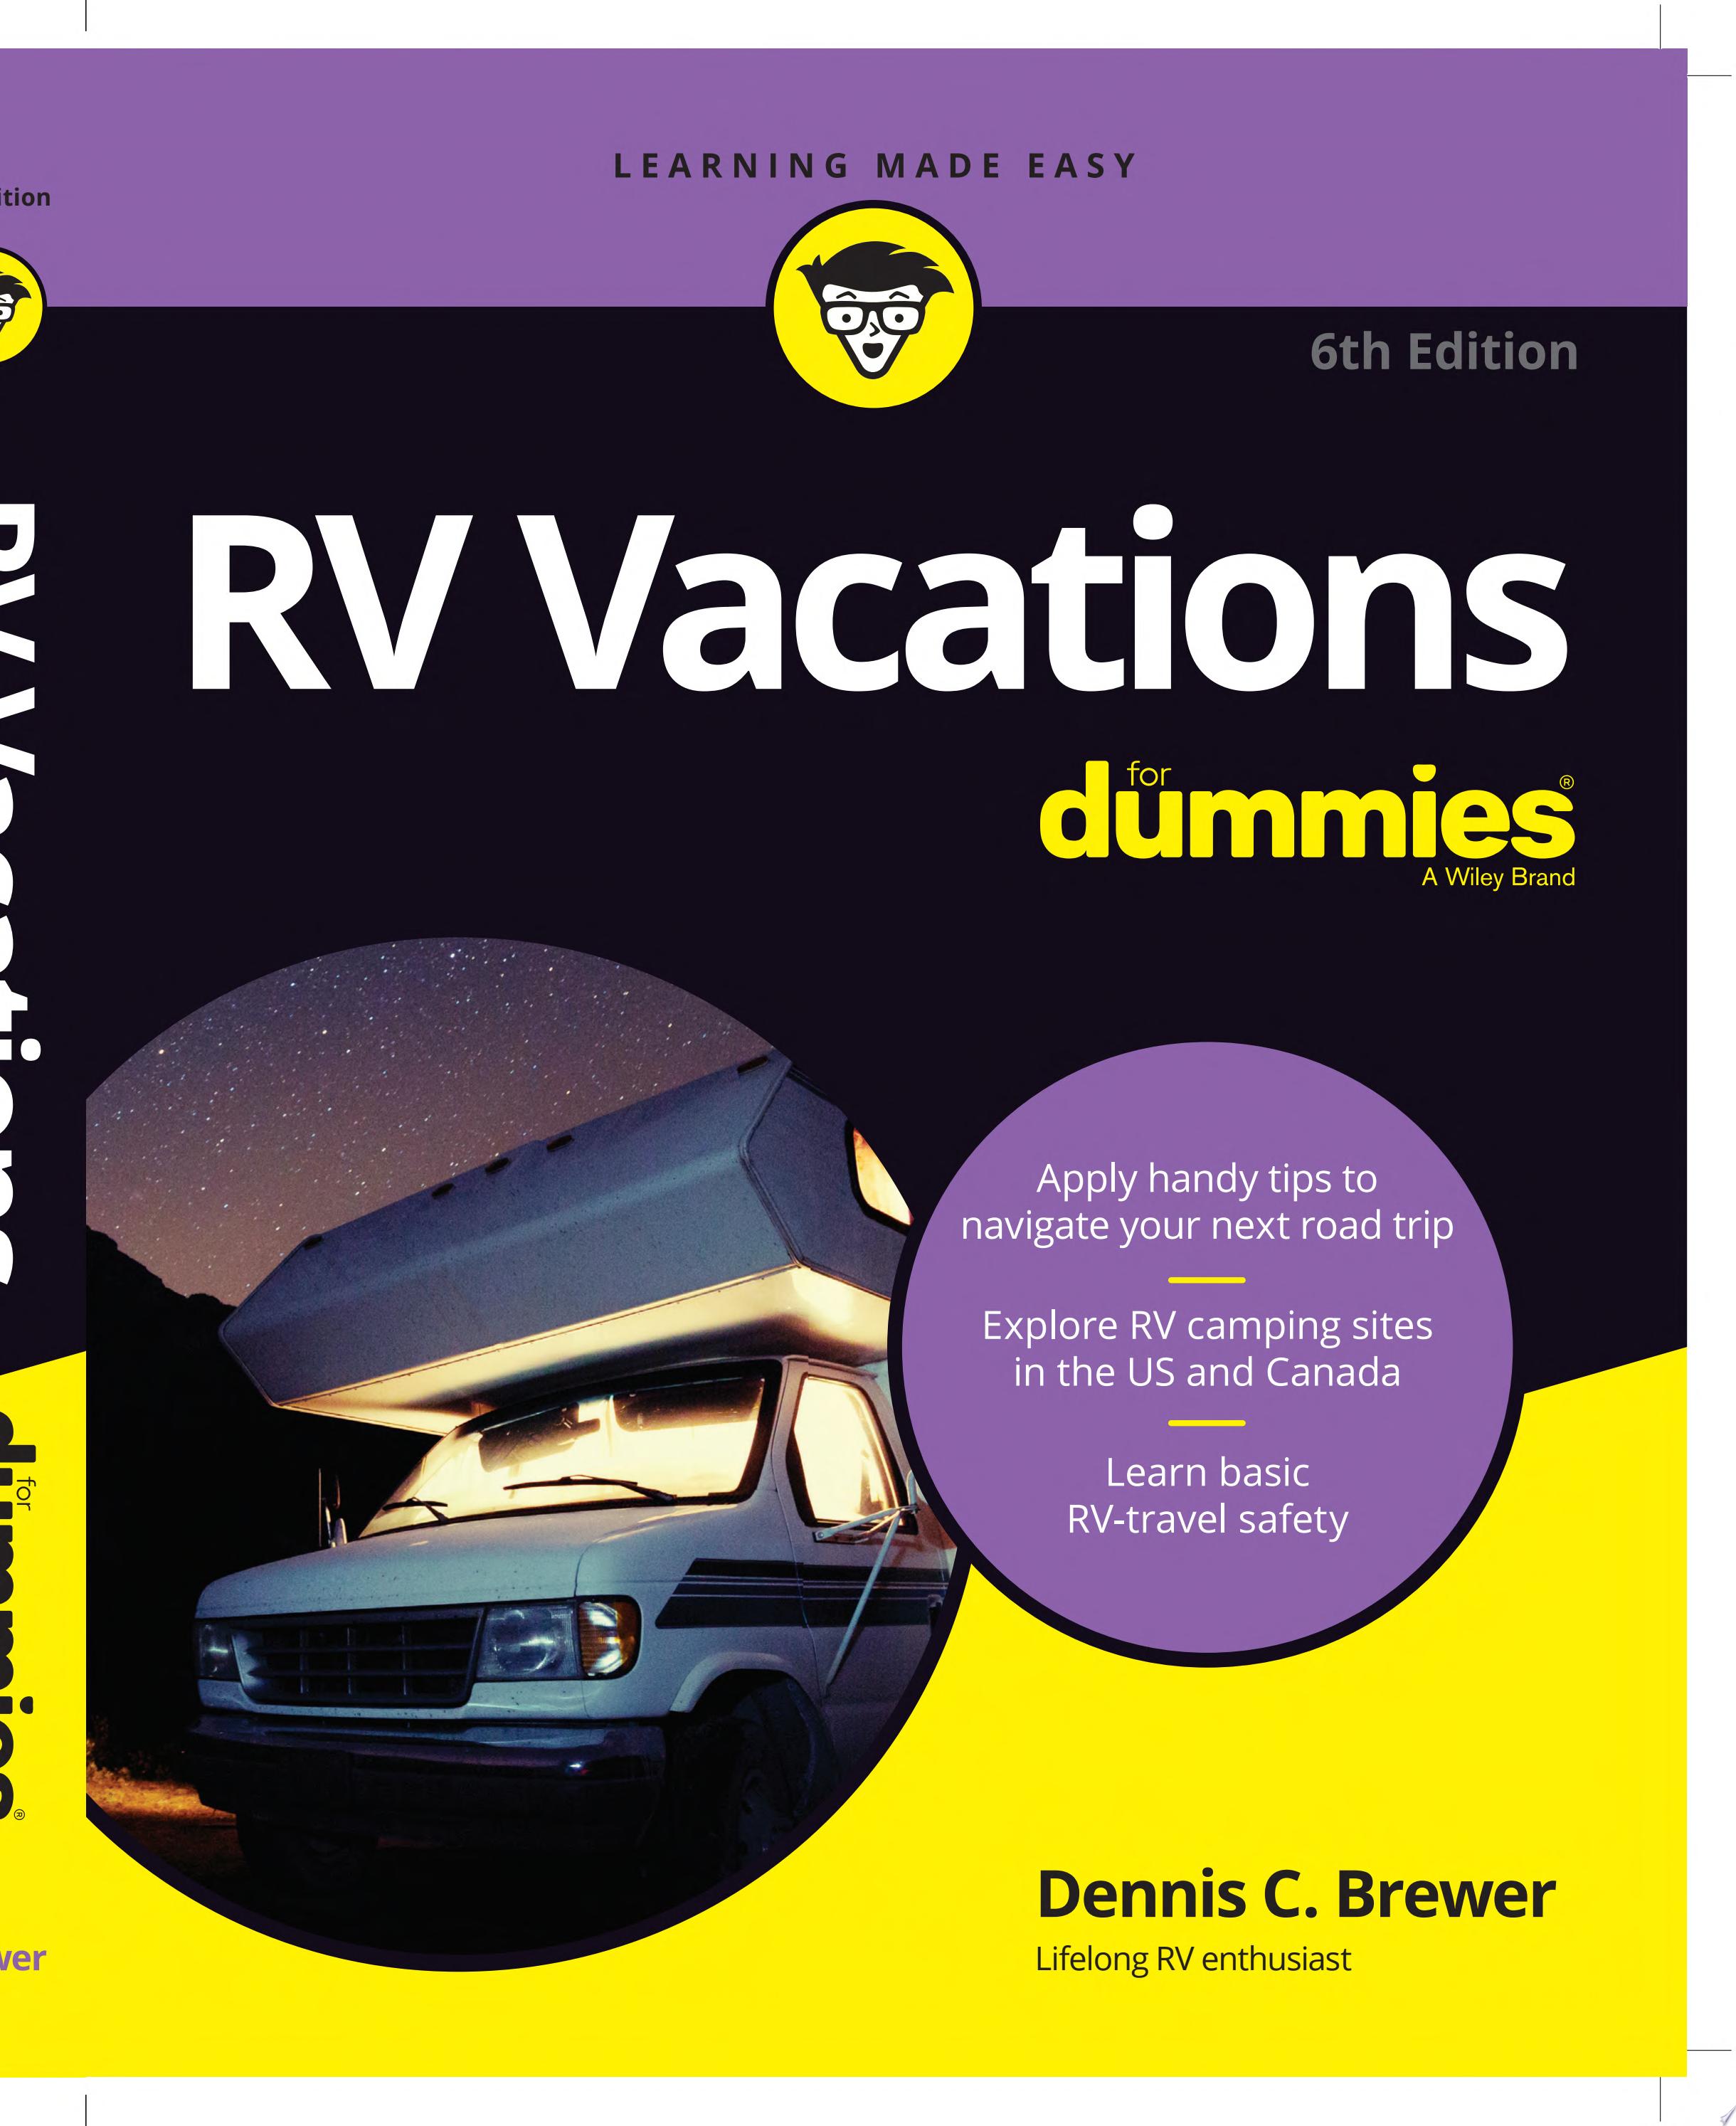 Image for "RV Vacations For Dummies"